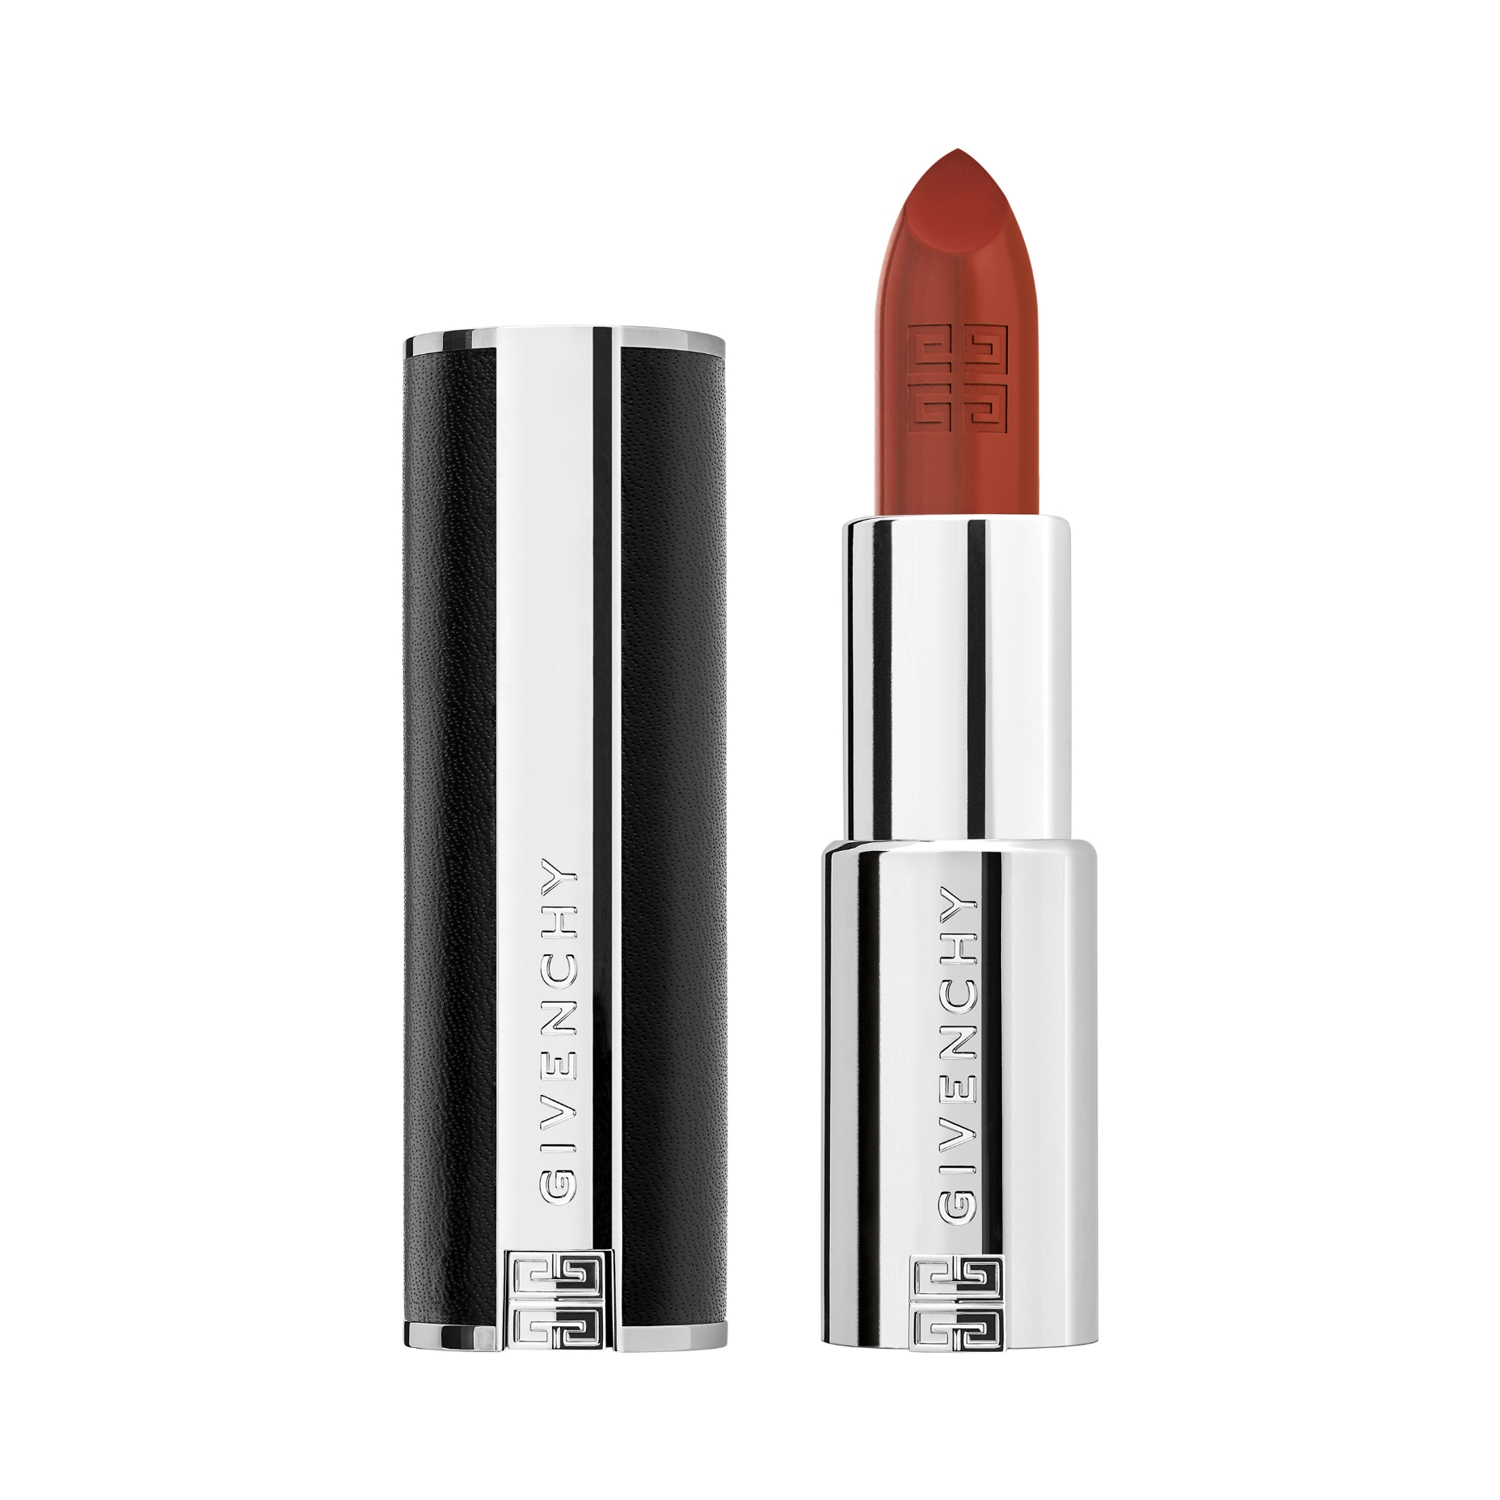 Givenchy | Givenchy Le Rouge Interdit Intense Silk Lipstick - N 501 Brun Epice (3.4g)